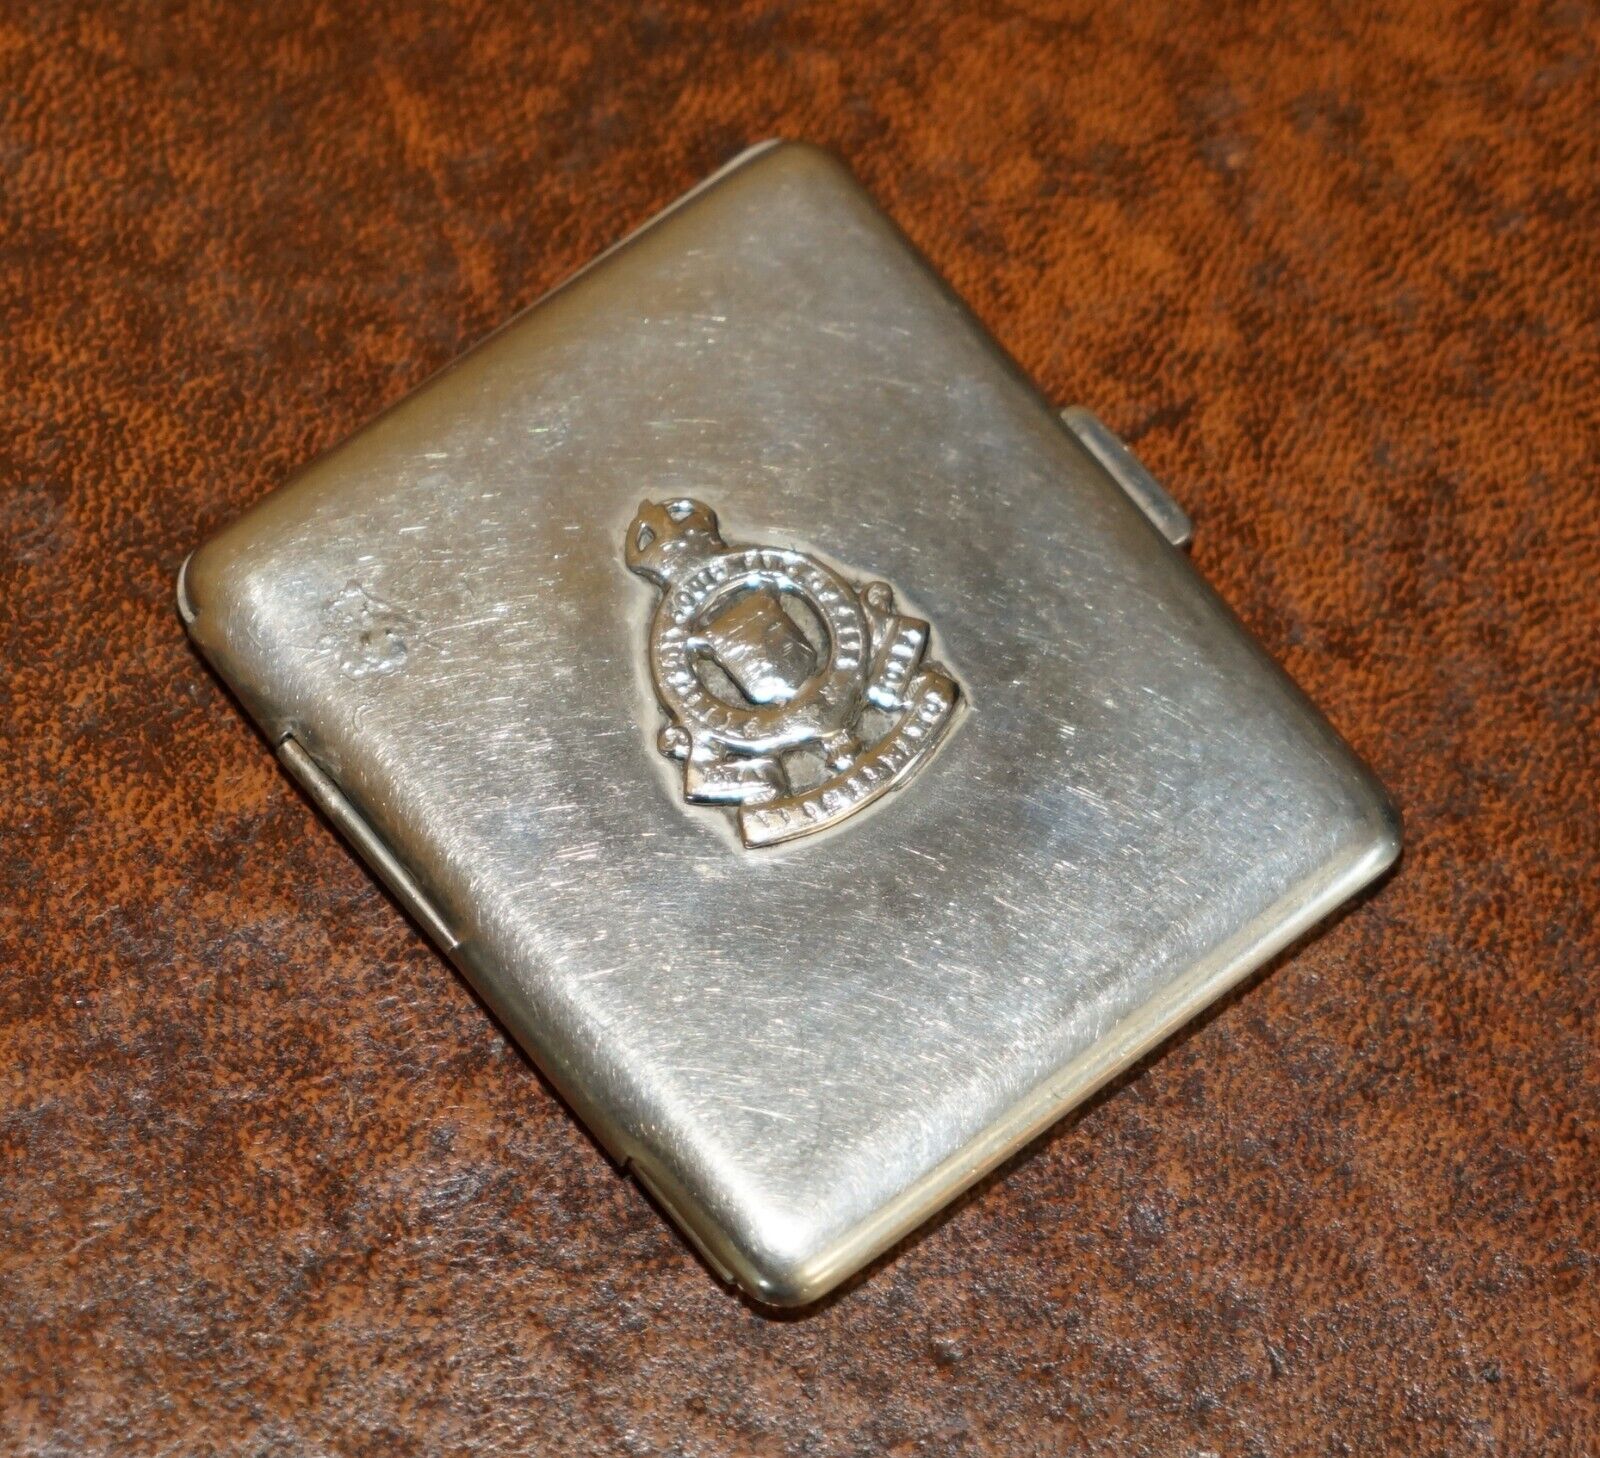 WW2 SILVER PLATED ROYAL CANADIAN ORDNANCE CORPS BADGE ON CIGARETTE CASE